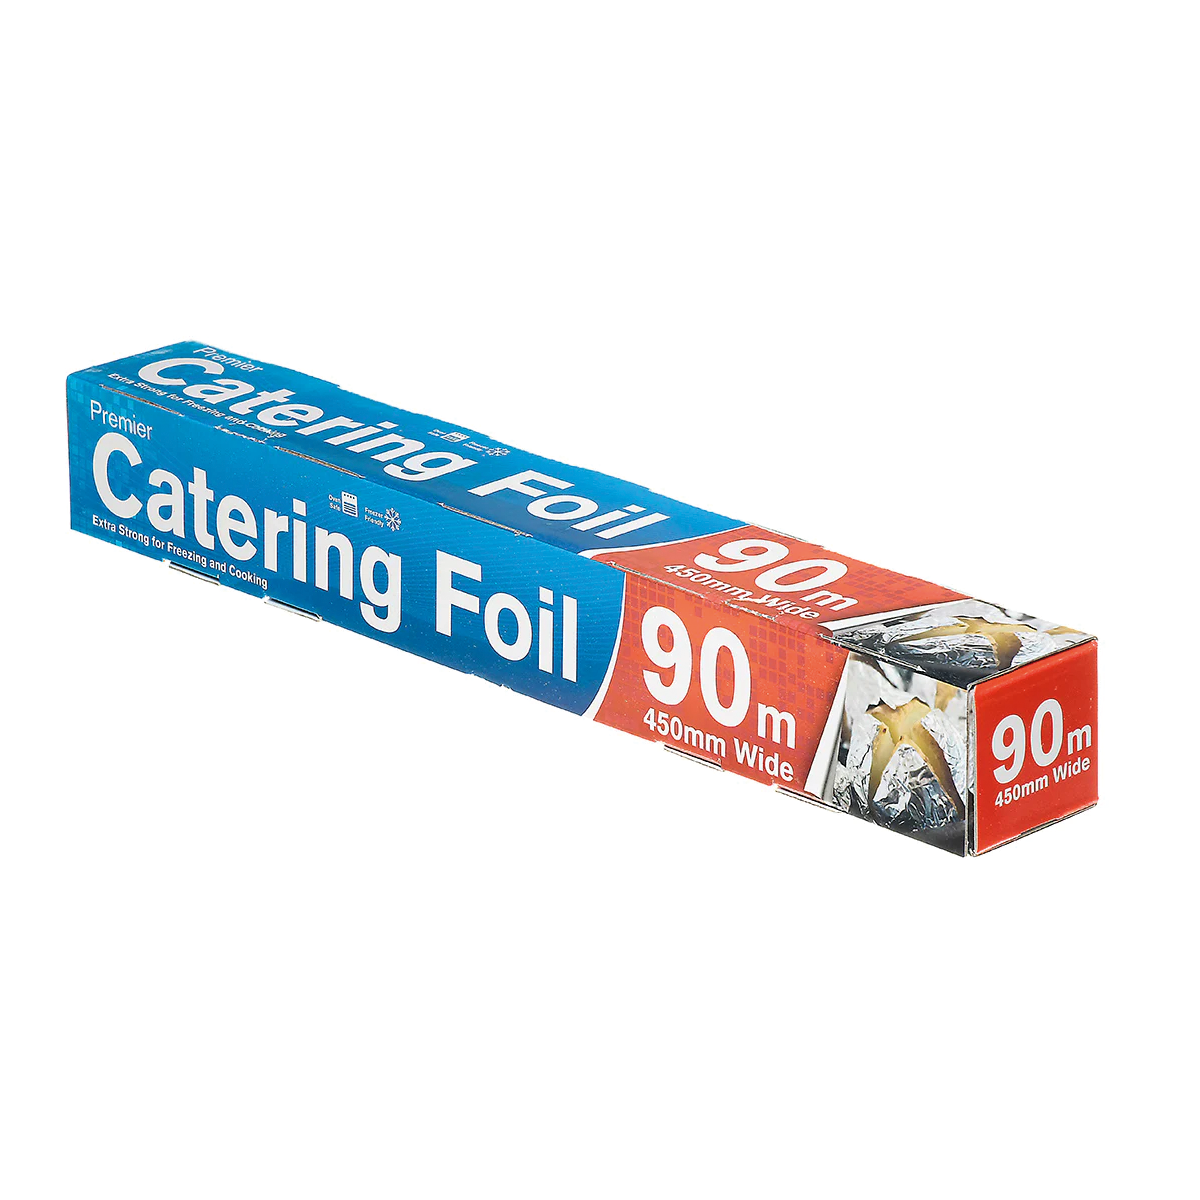 Catering Tin Foil 90m